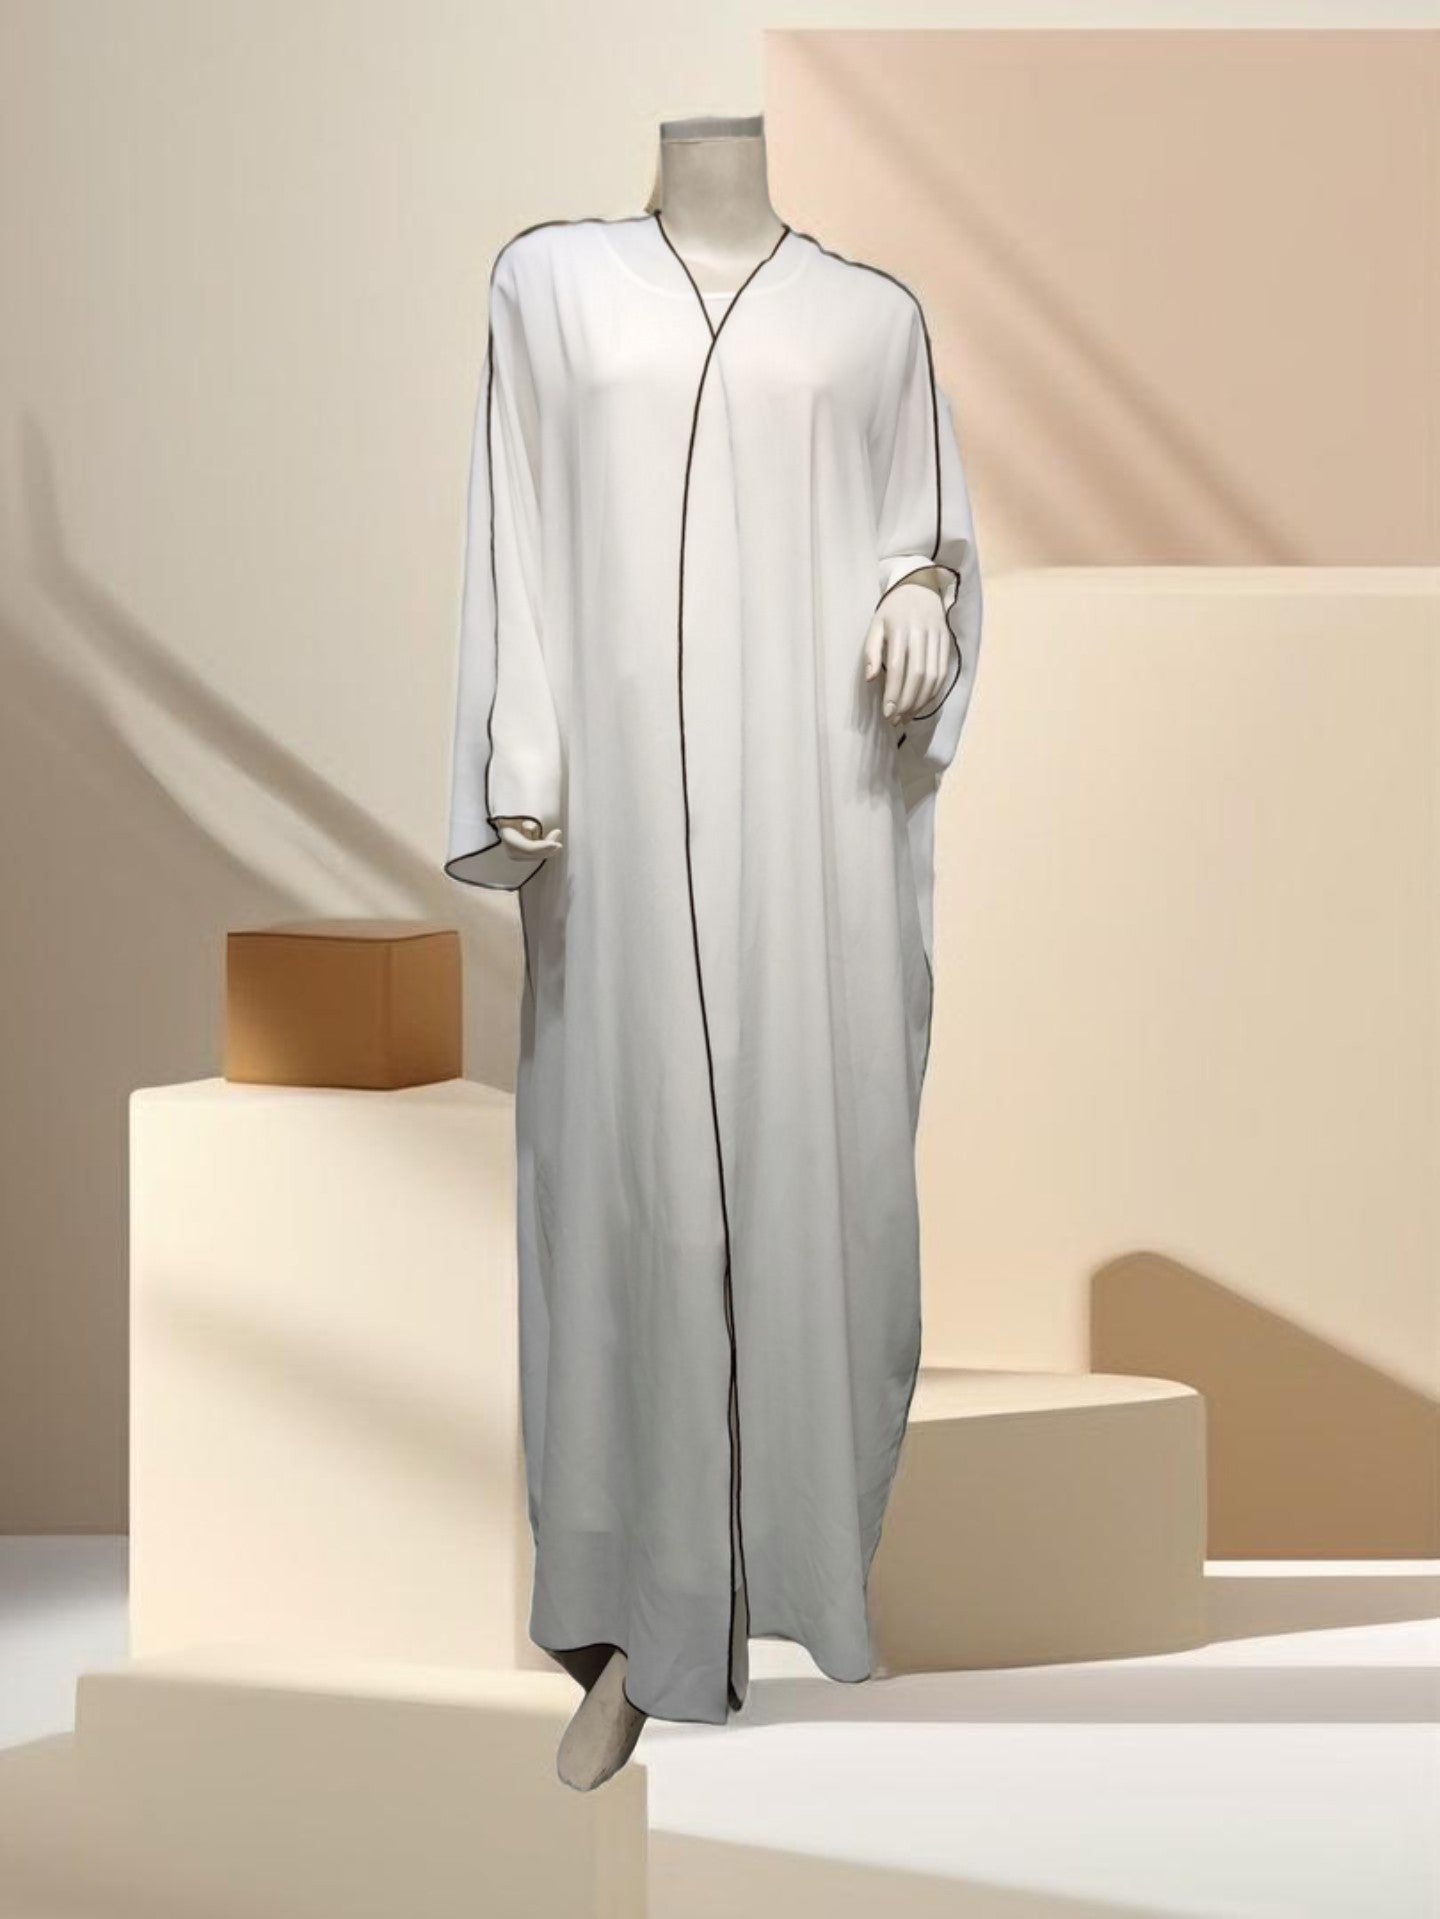 One piece abyad middle eastern abaya - Try Modest Limited 